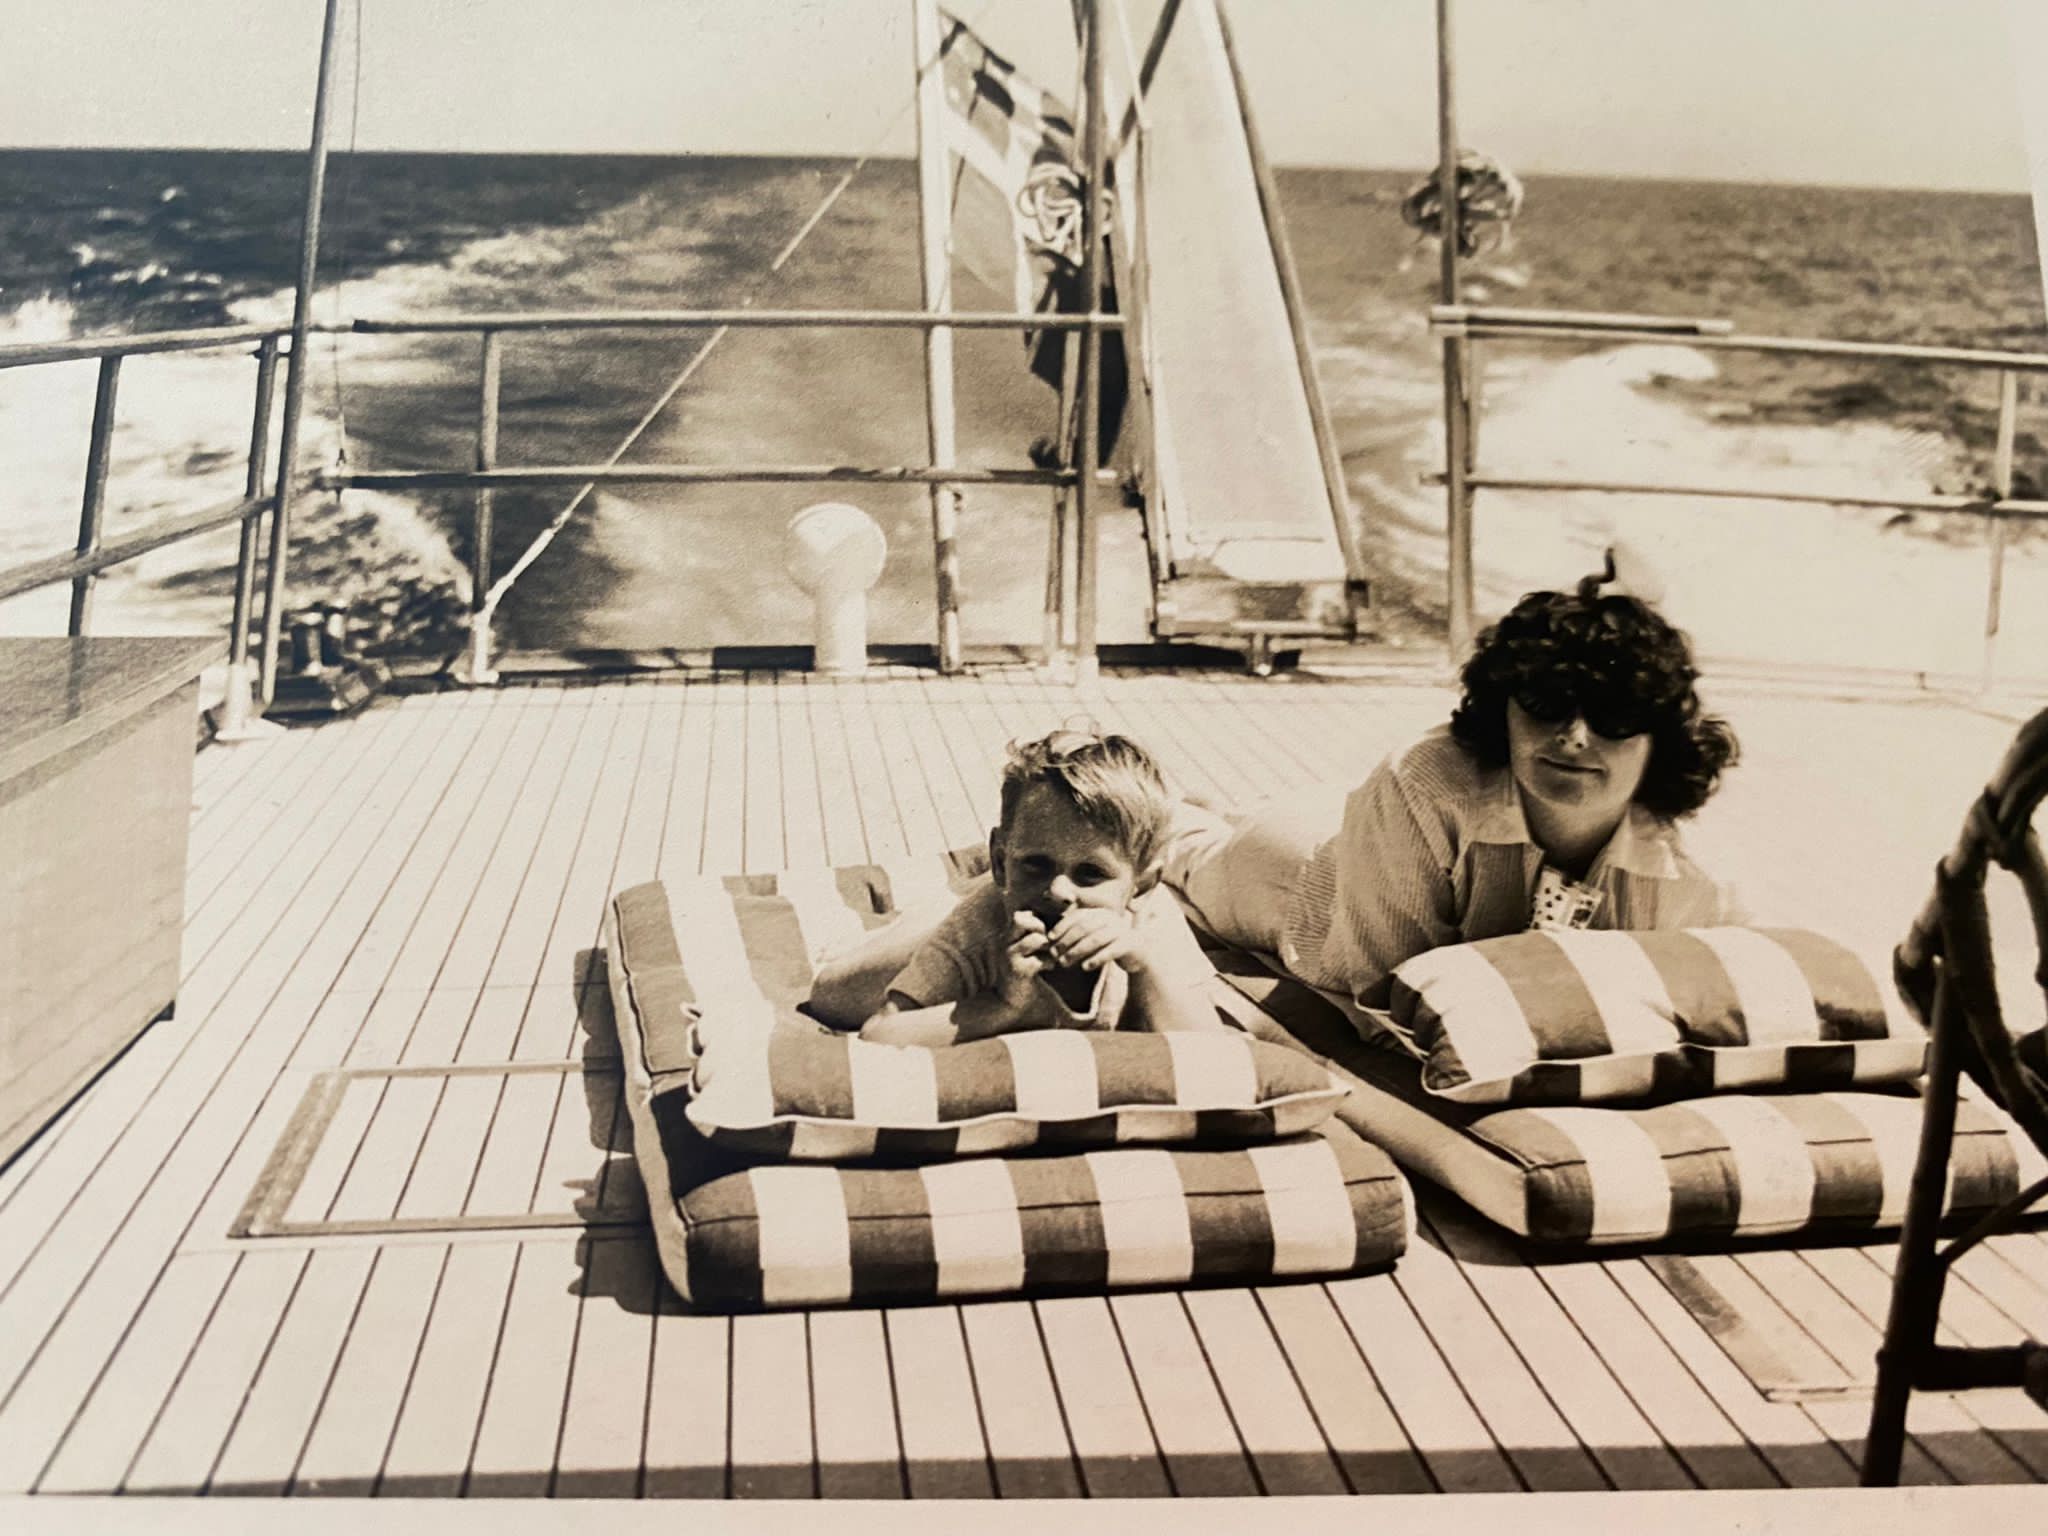 A FAMILY PASSION FOR YACHTING